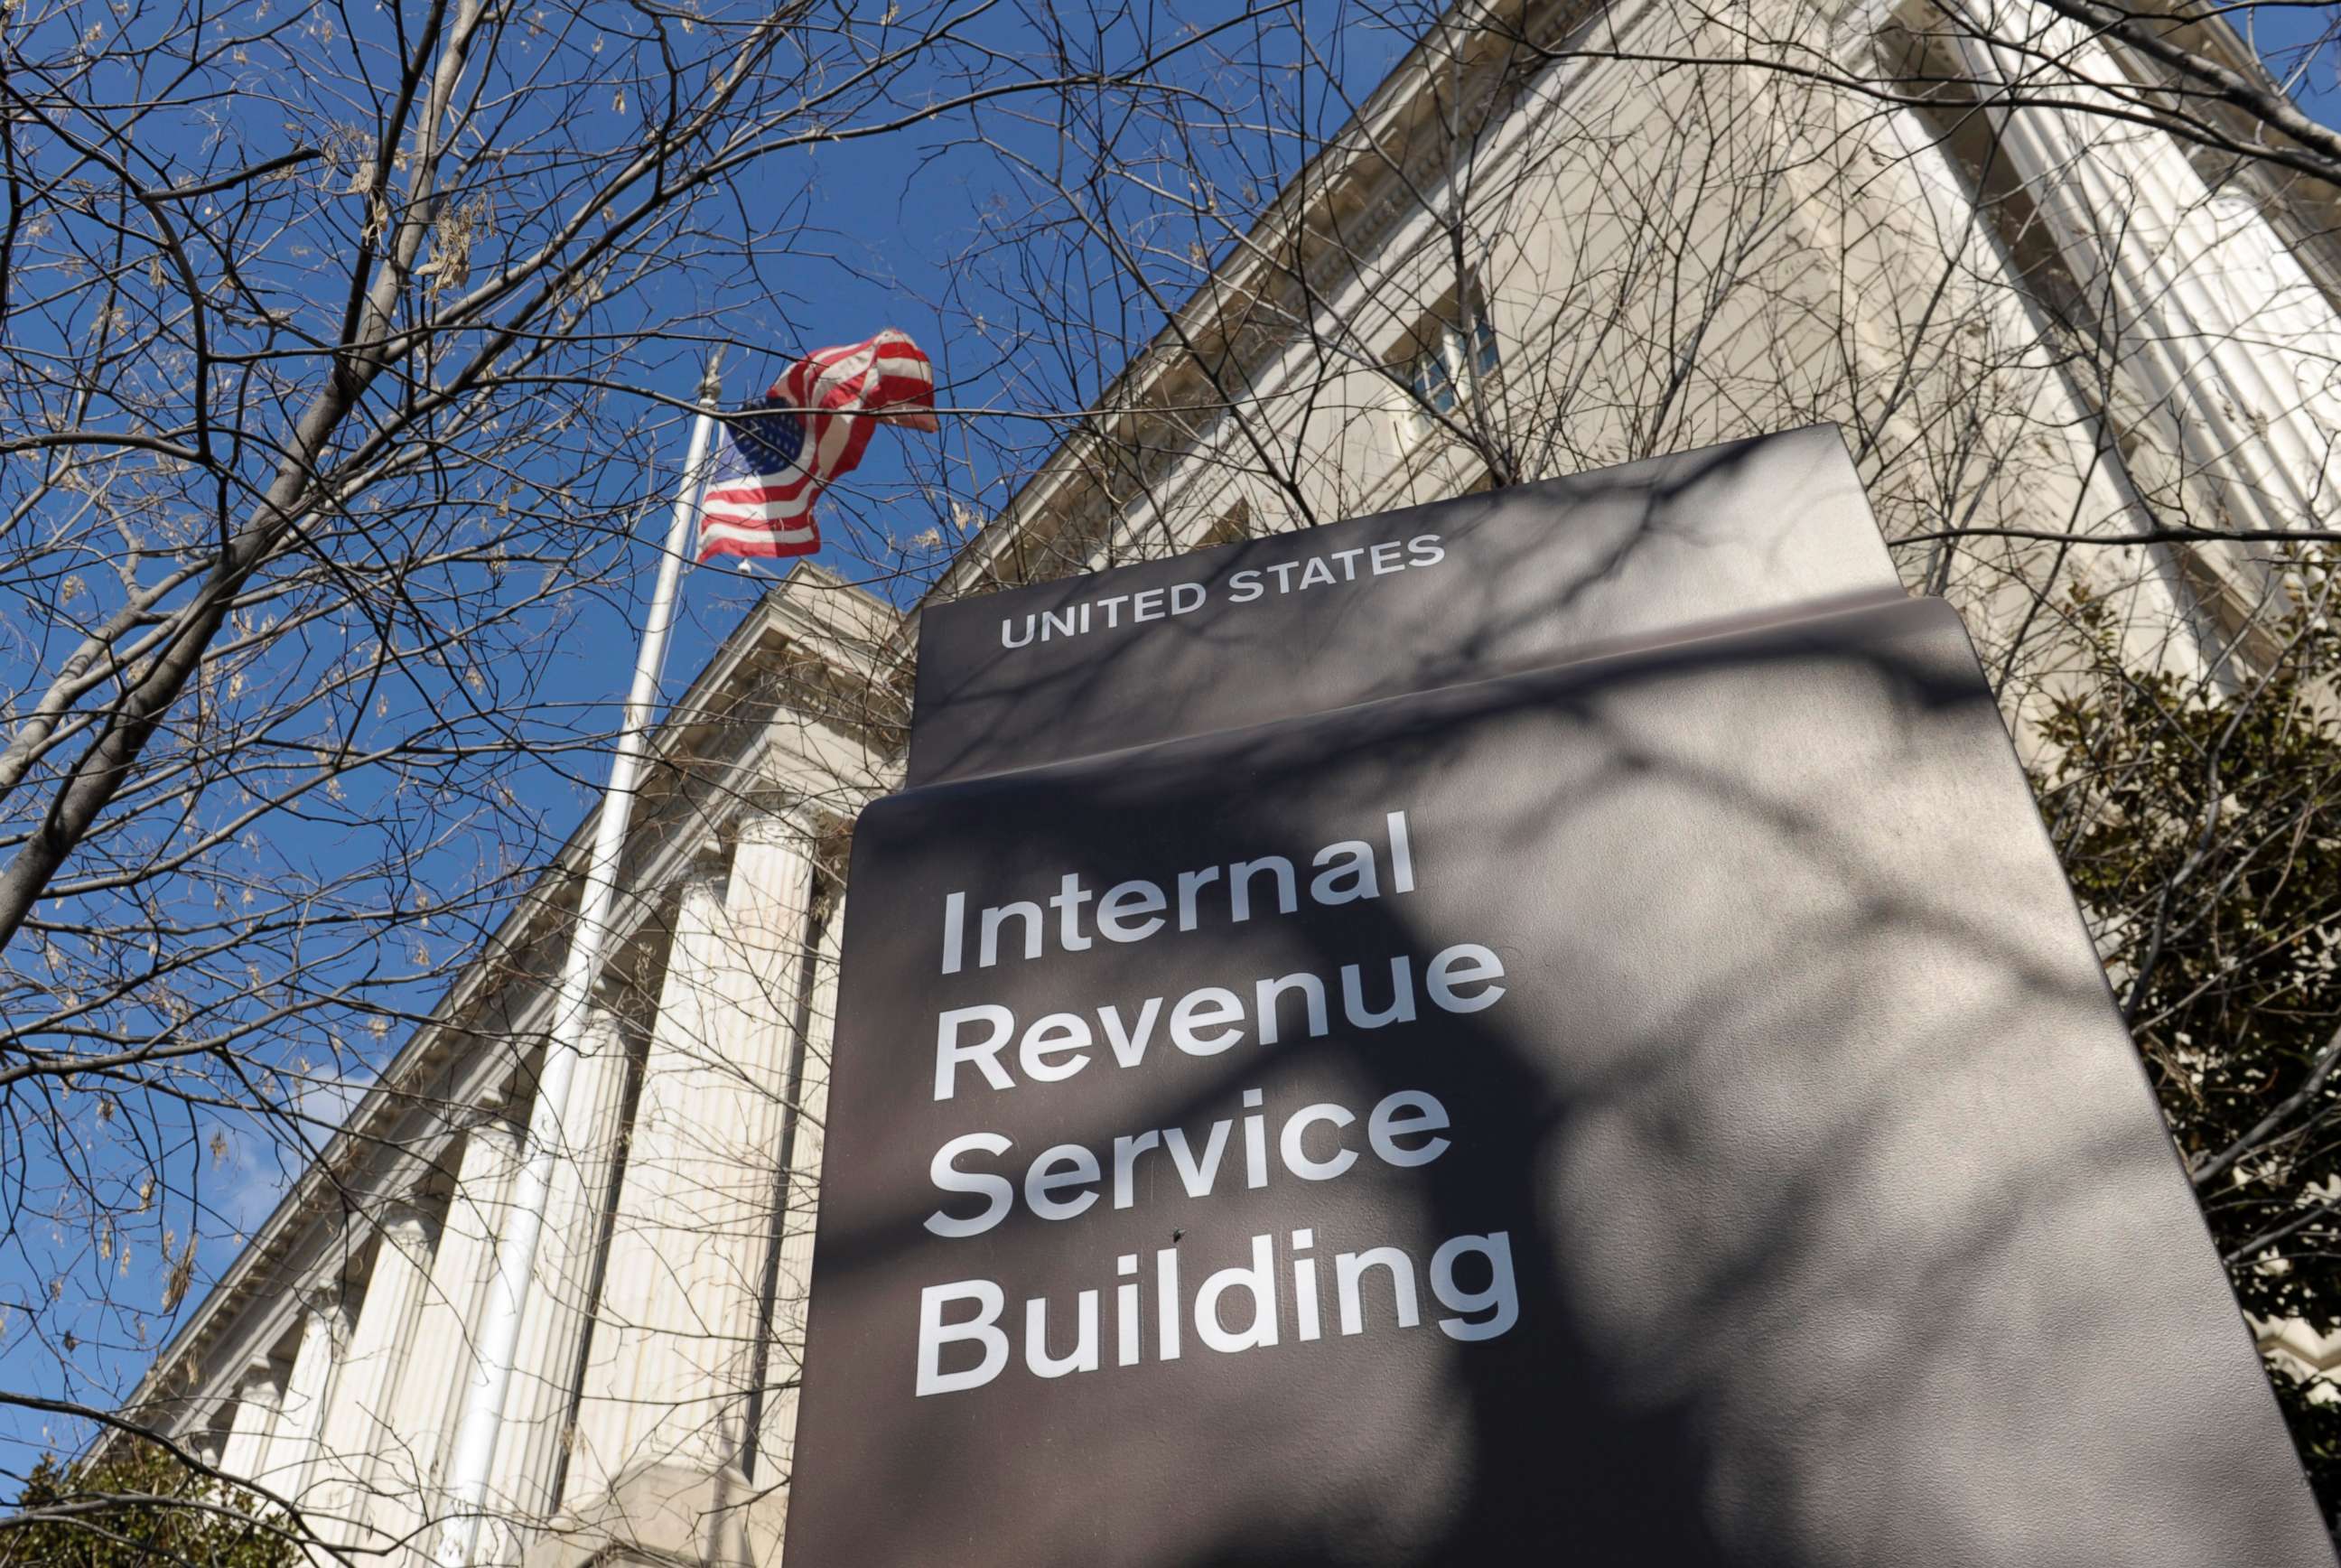 PHOTO: The exterior of the Internal Revenue Service building in Washington.